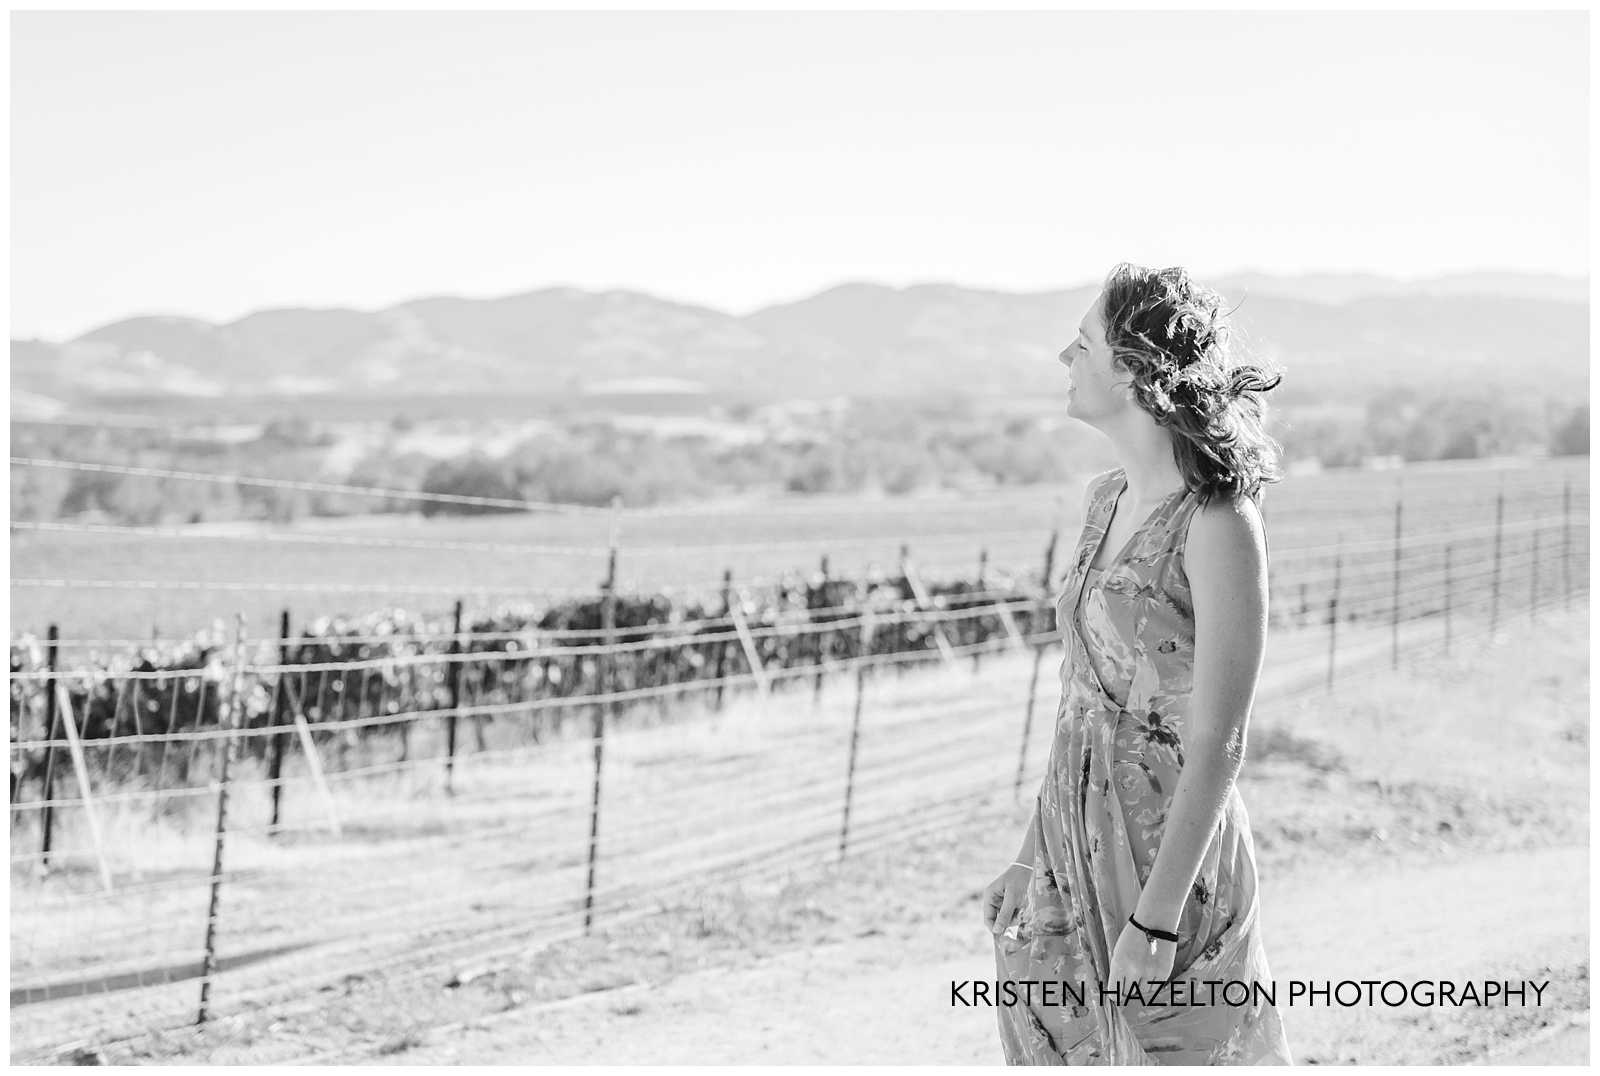 Black and white photo of a girl looking at the Livermore, CA hills